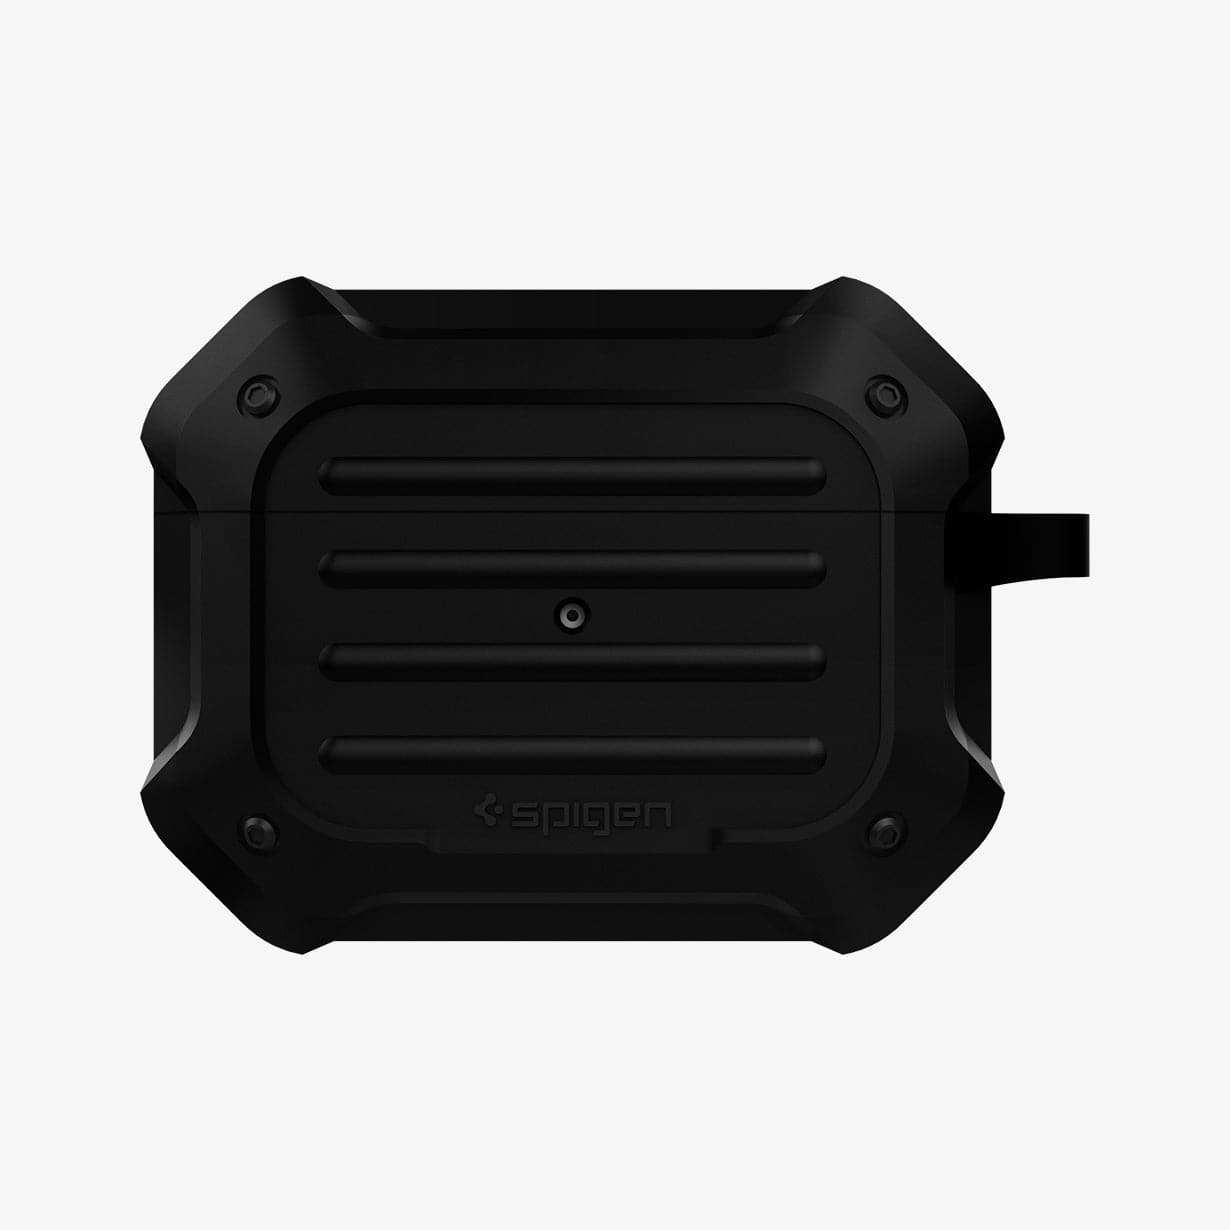 ASD00537 - Apple AirPods Pro Case Tough Armor in black showing the front